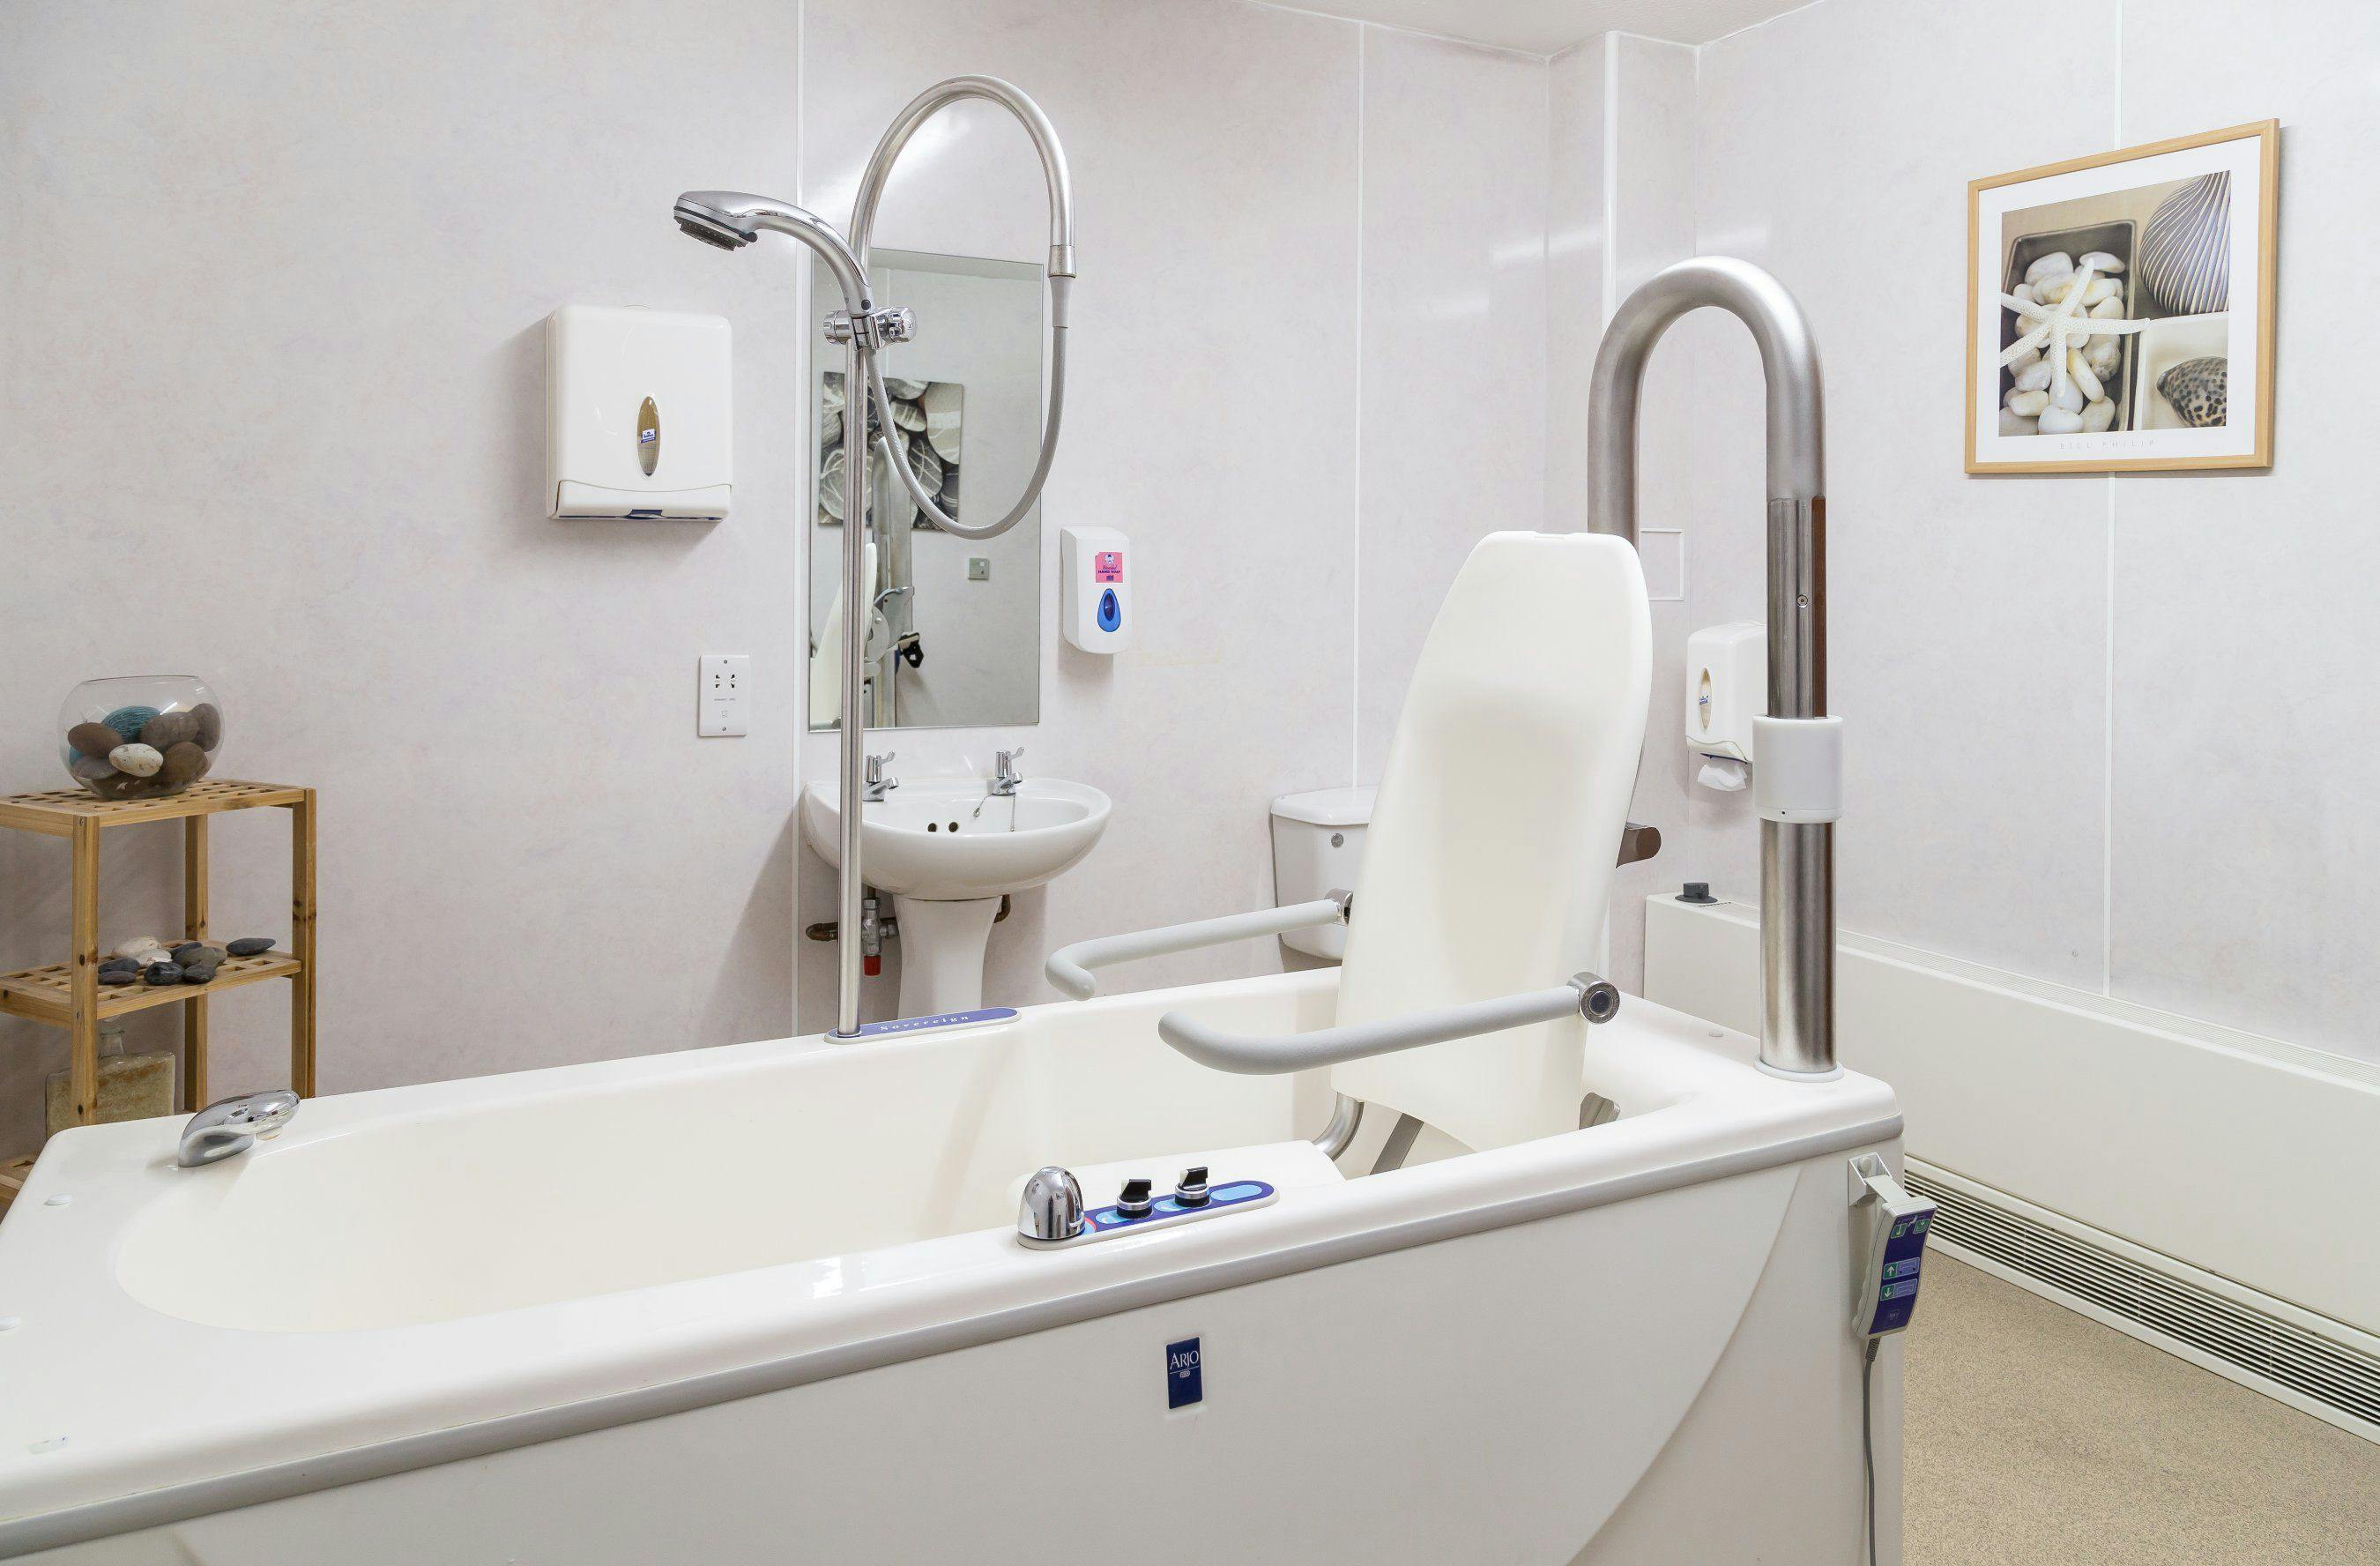 Spa Bathroom at Lethen Park Care Home in Aberdeen, Scotland